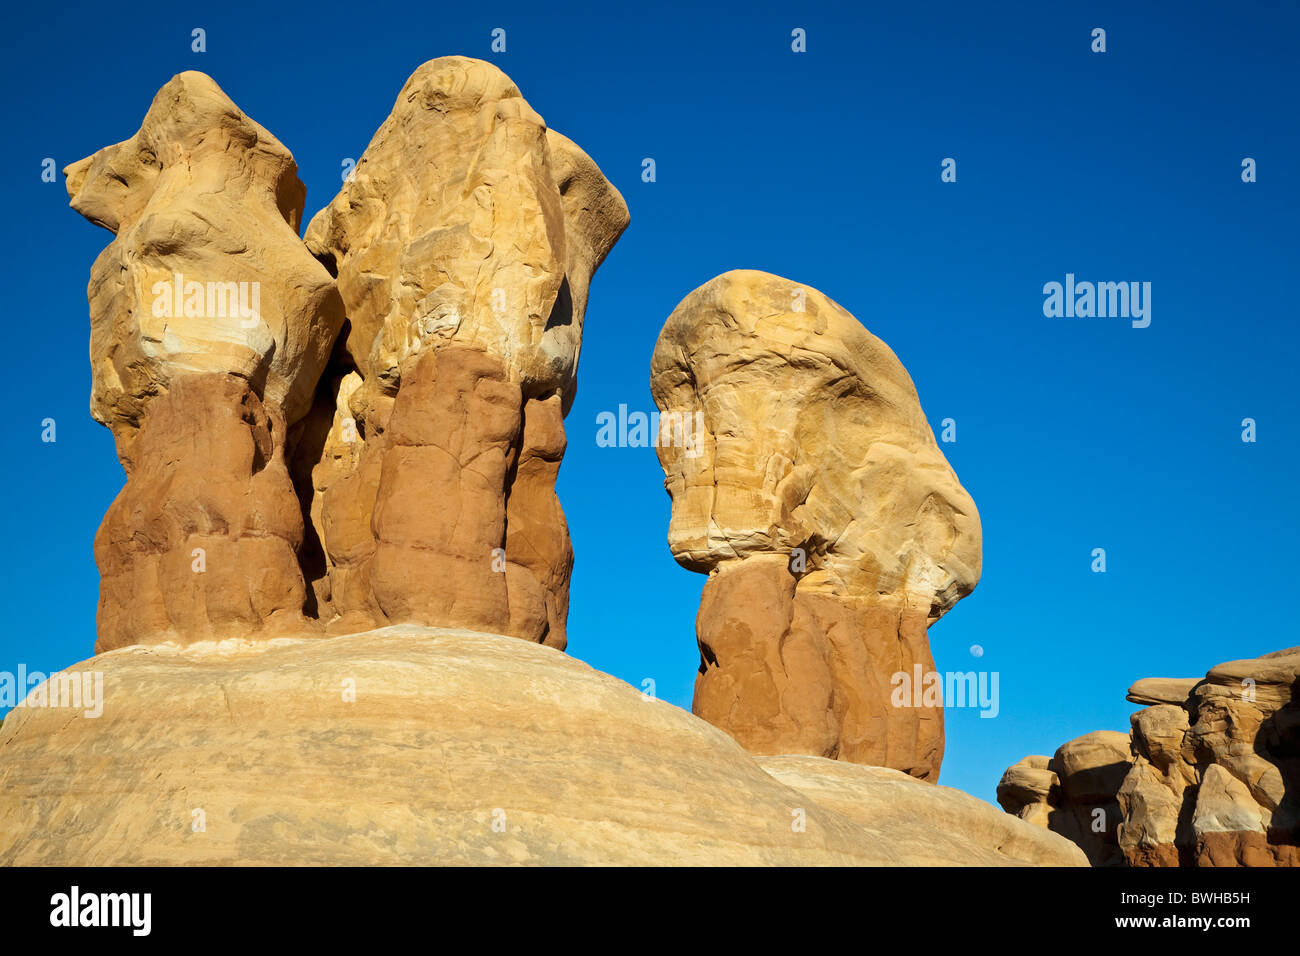 Stone formations in Devils Garden, Hole in the Rock Road, Grand Staircase-Escalante National Monument, Utah, USA Stock Photo